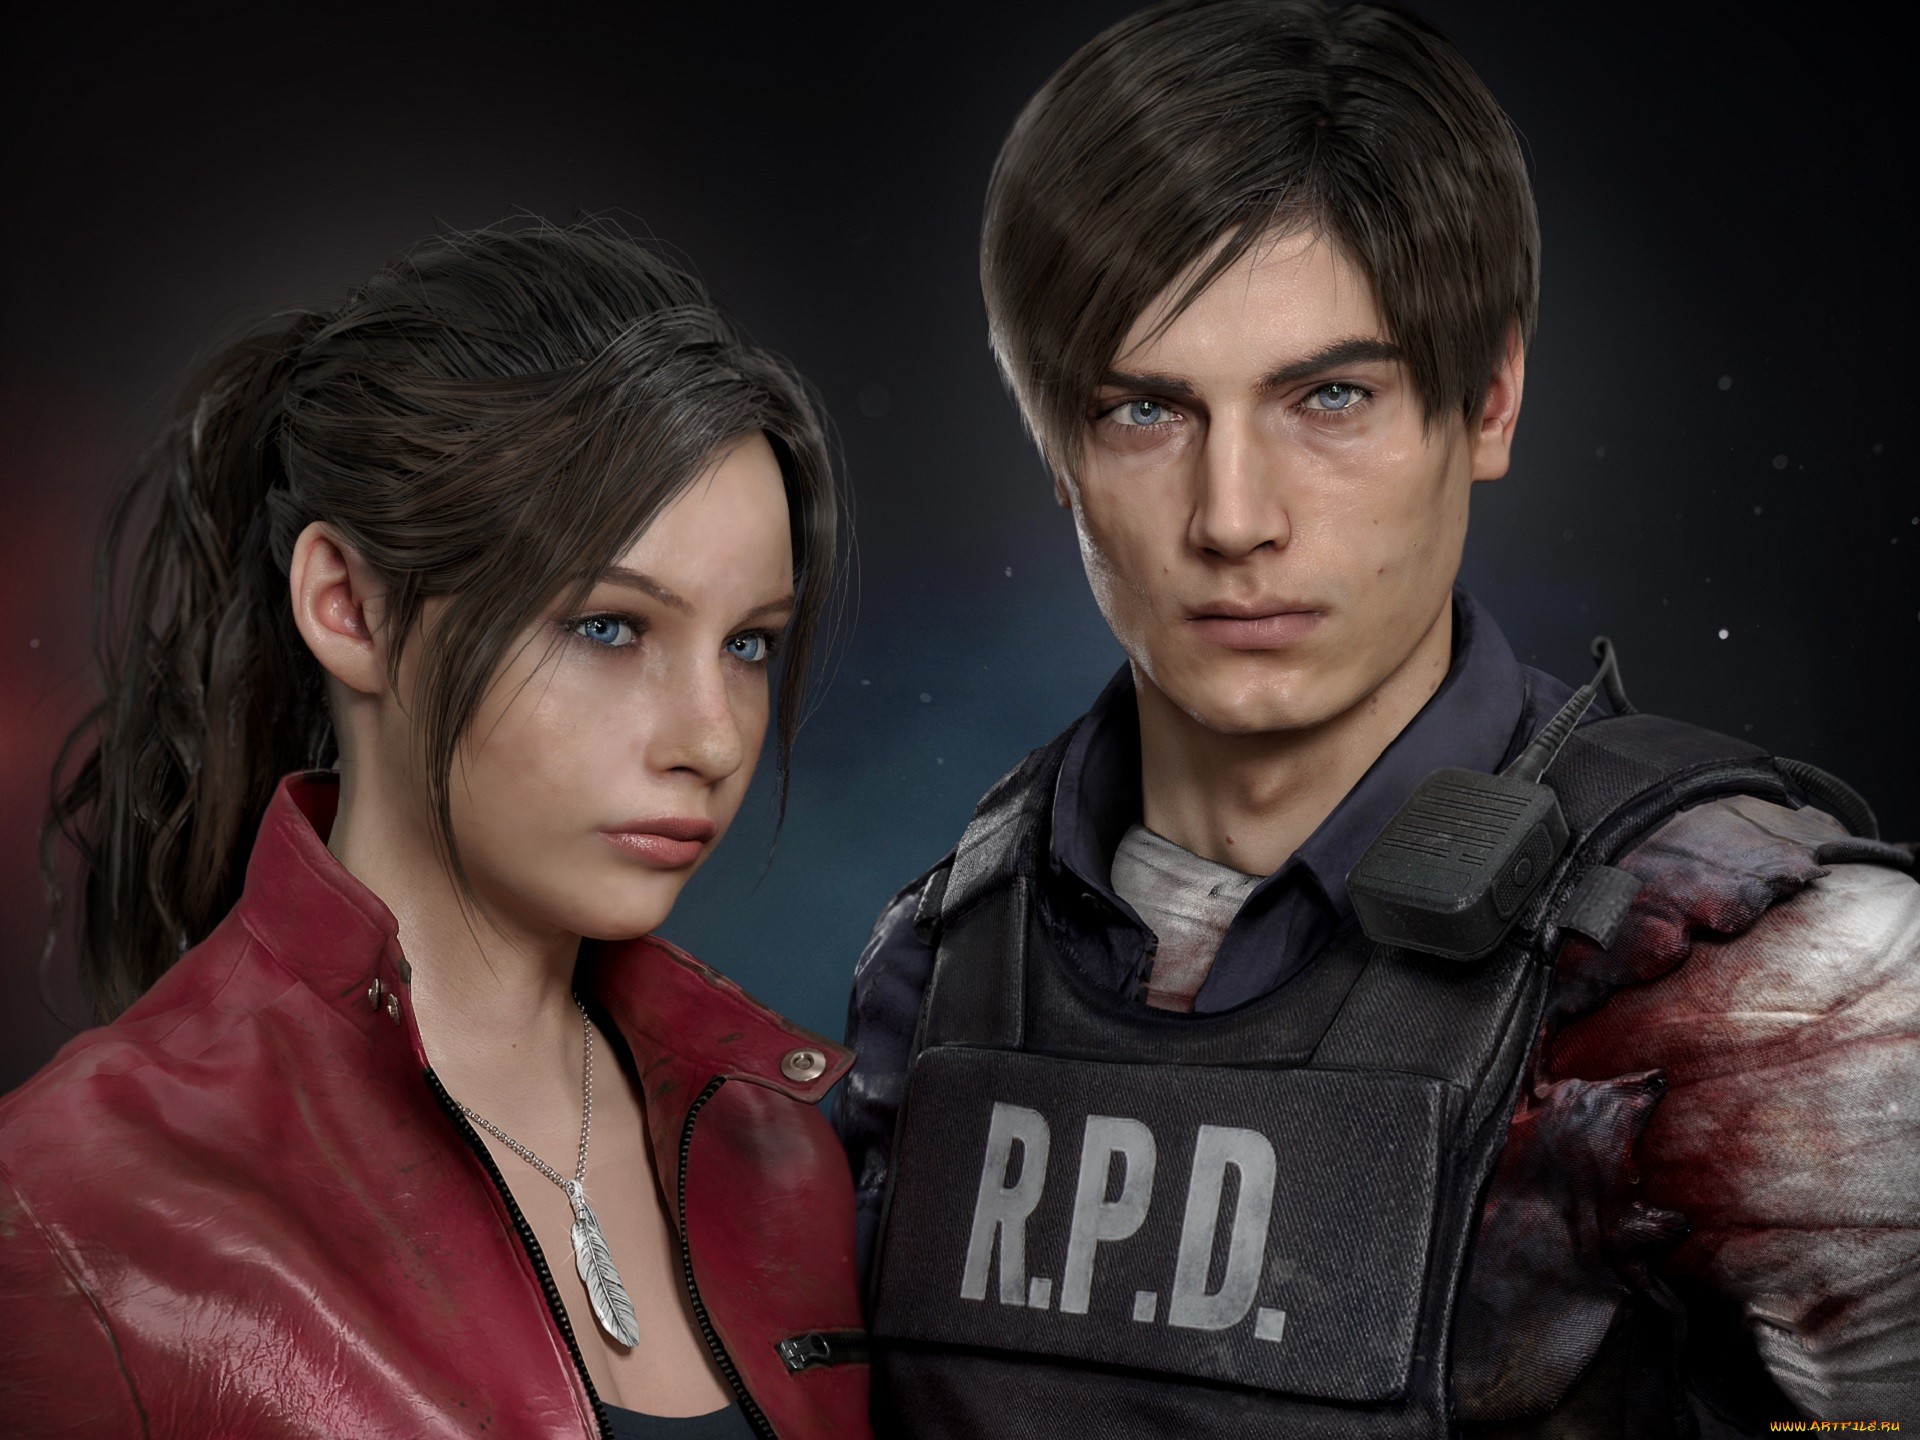 Claire Redfield, Resident Evil 2 Remake, video games, Video Game